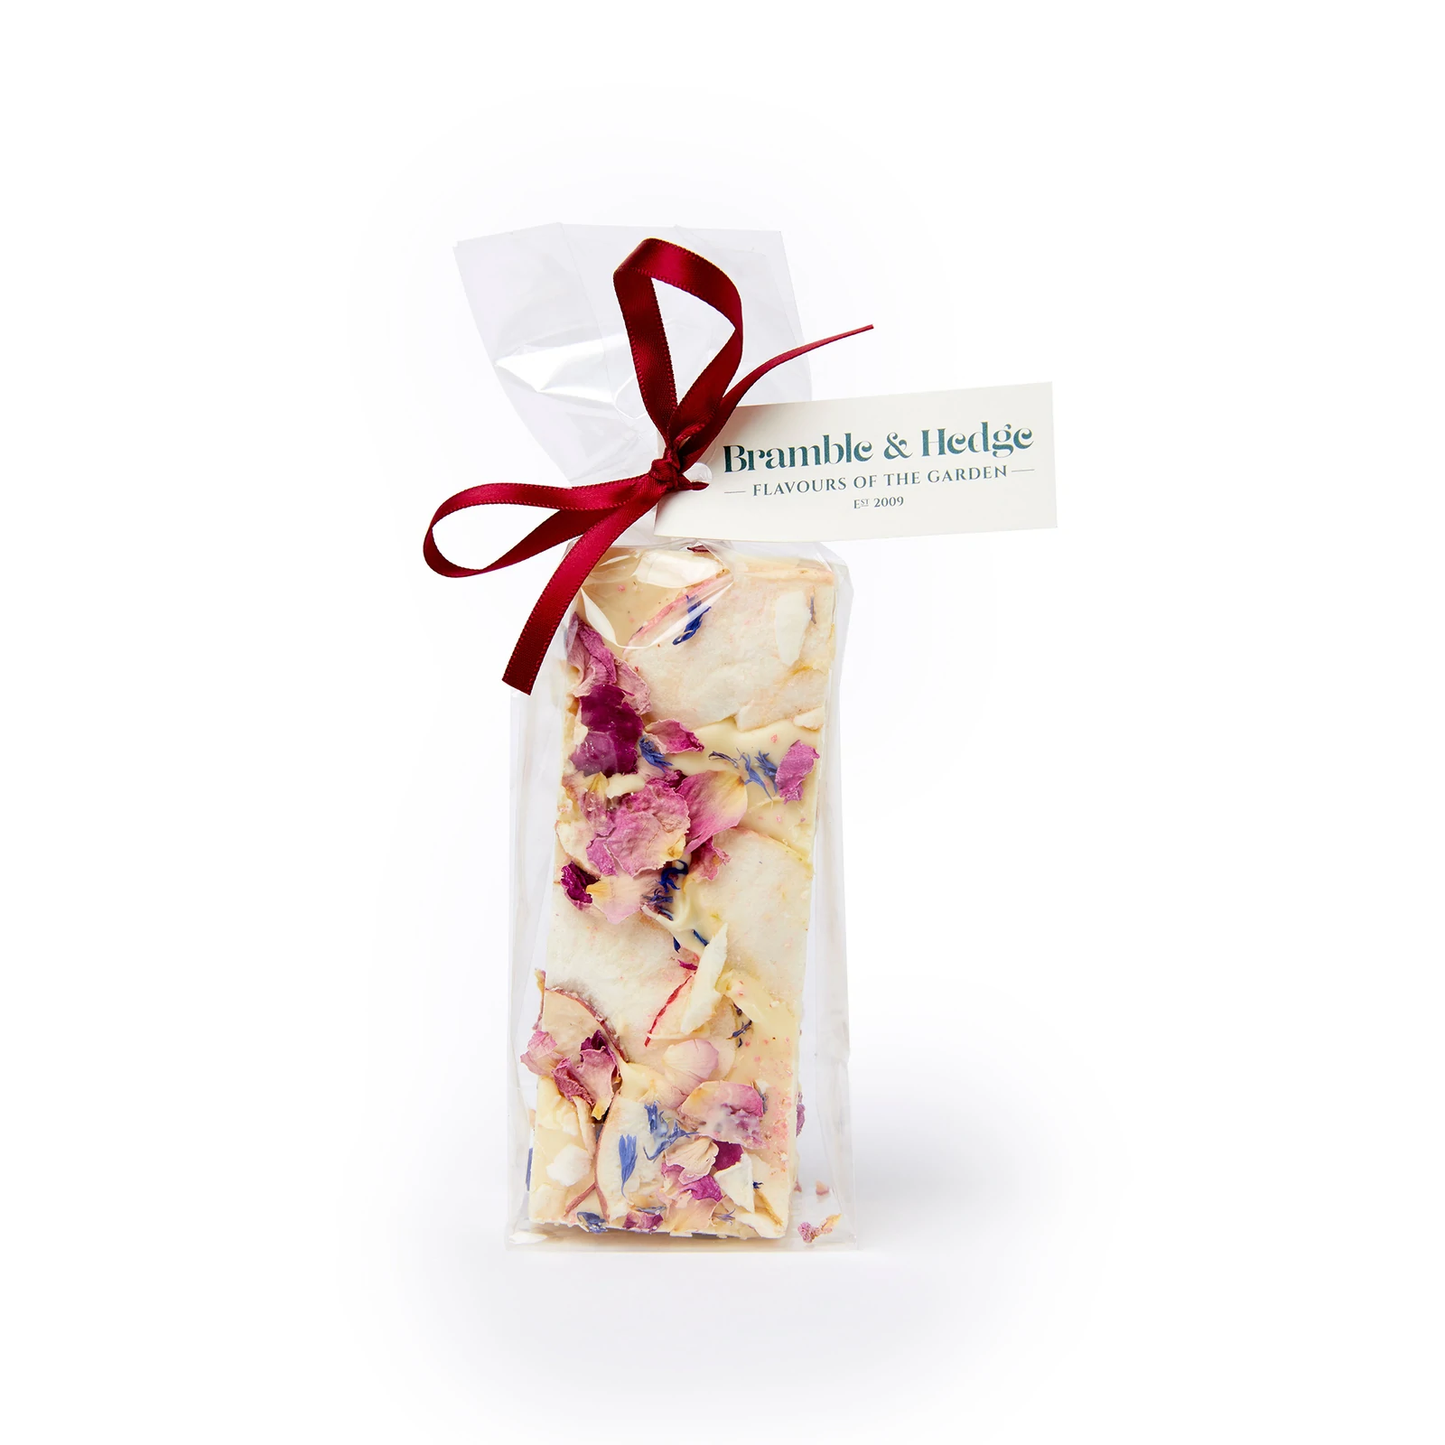 Apple Teacake Spiced Nougat with White Chocolate